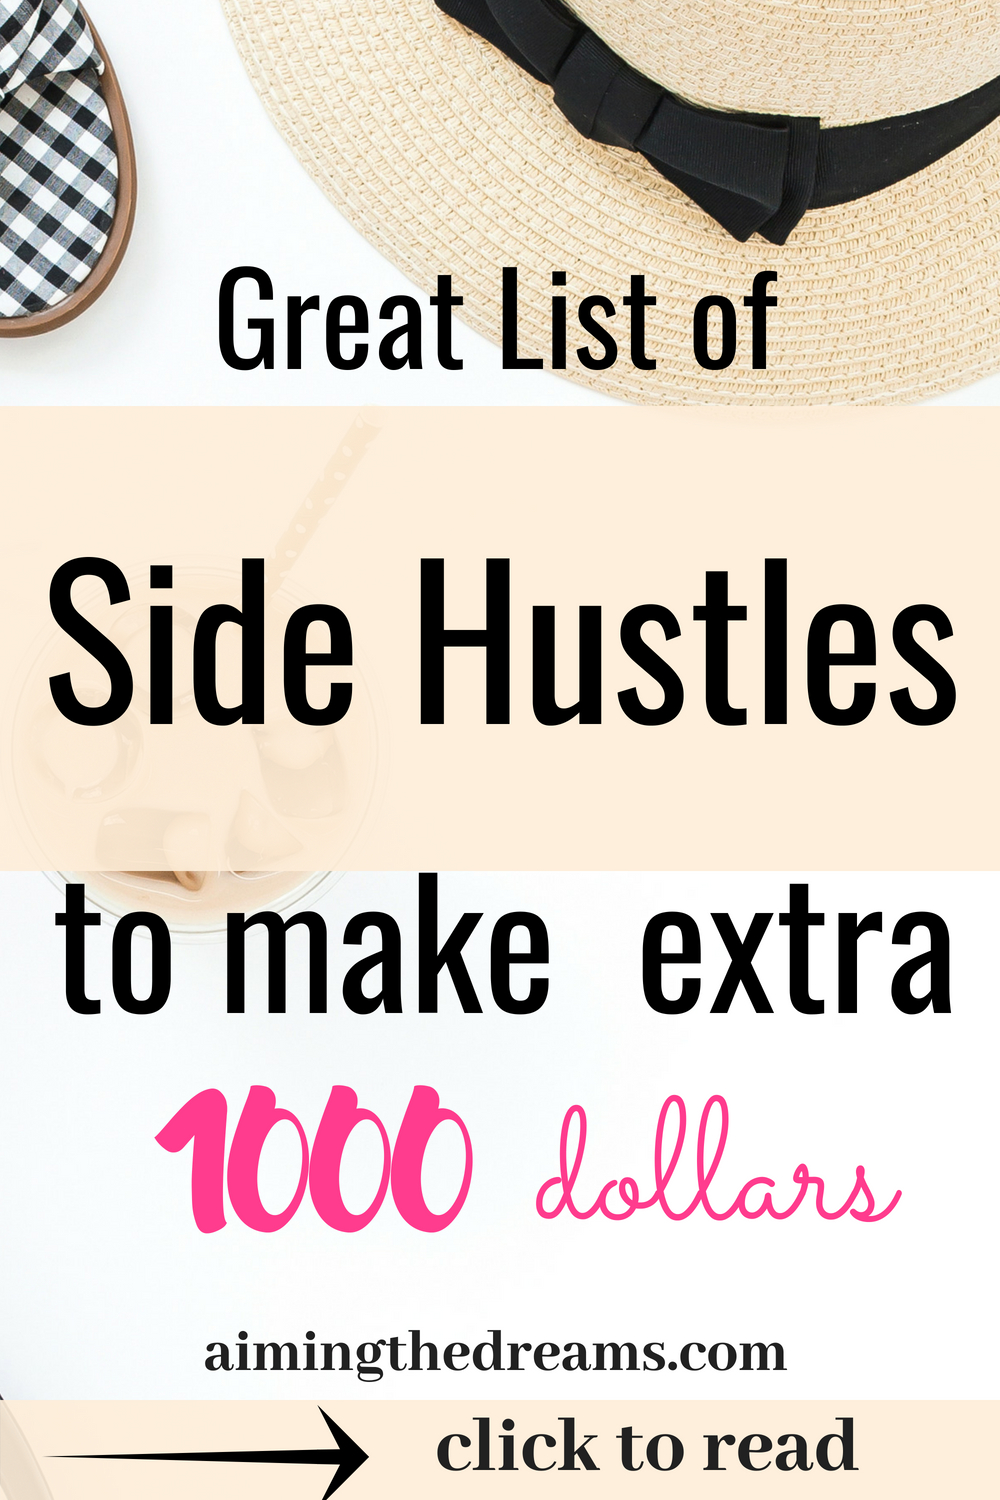 #List of #side #hustles to #earn #passive #income from home. Click to read